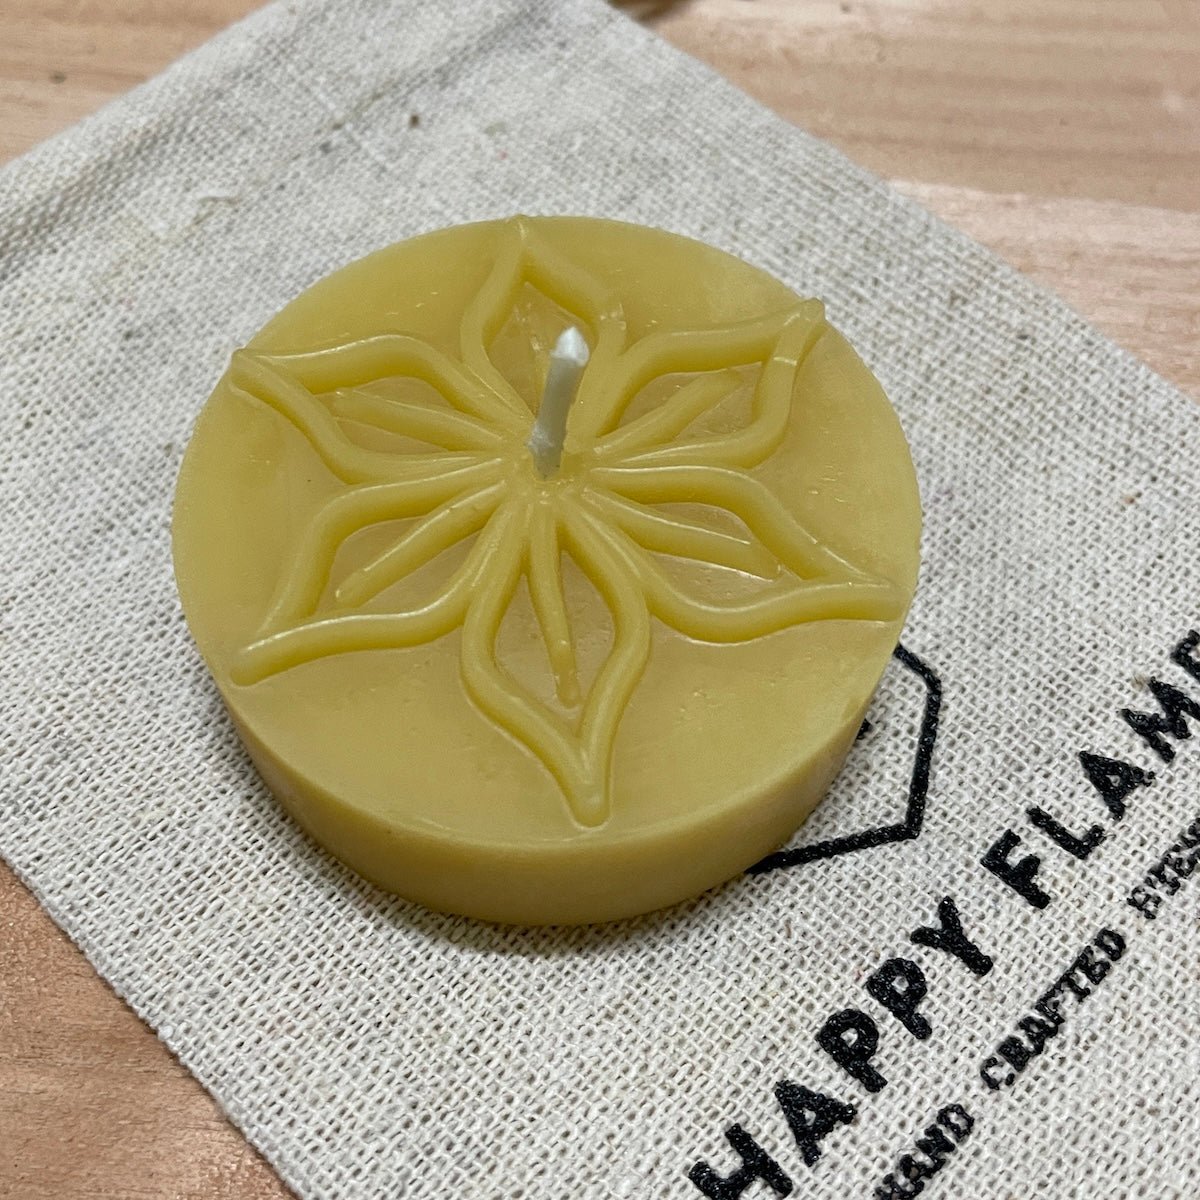 Beeswax meditation candle from Happy Flame Star pattern